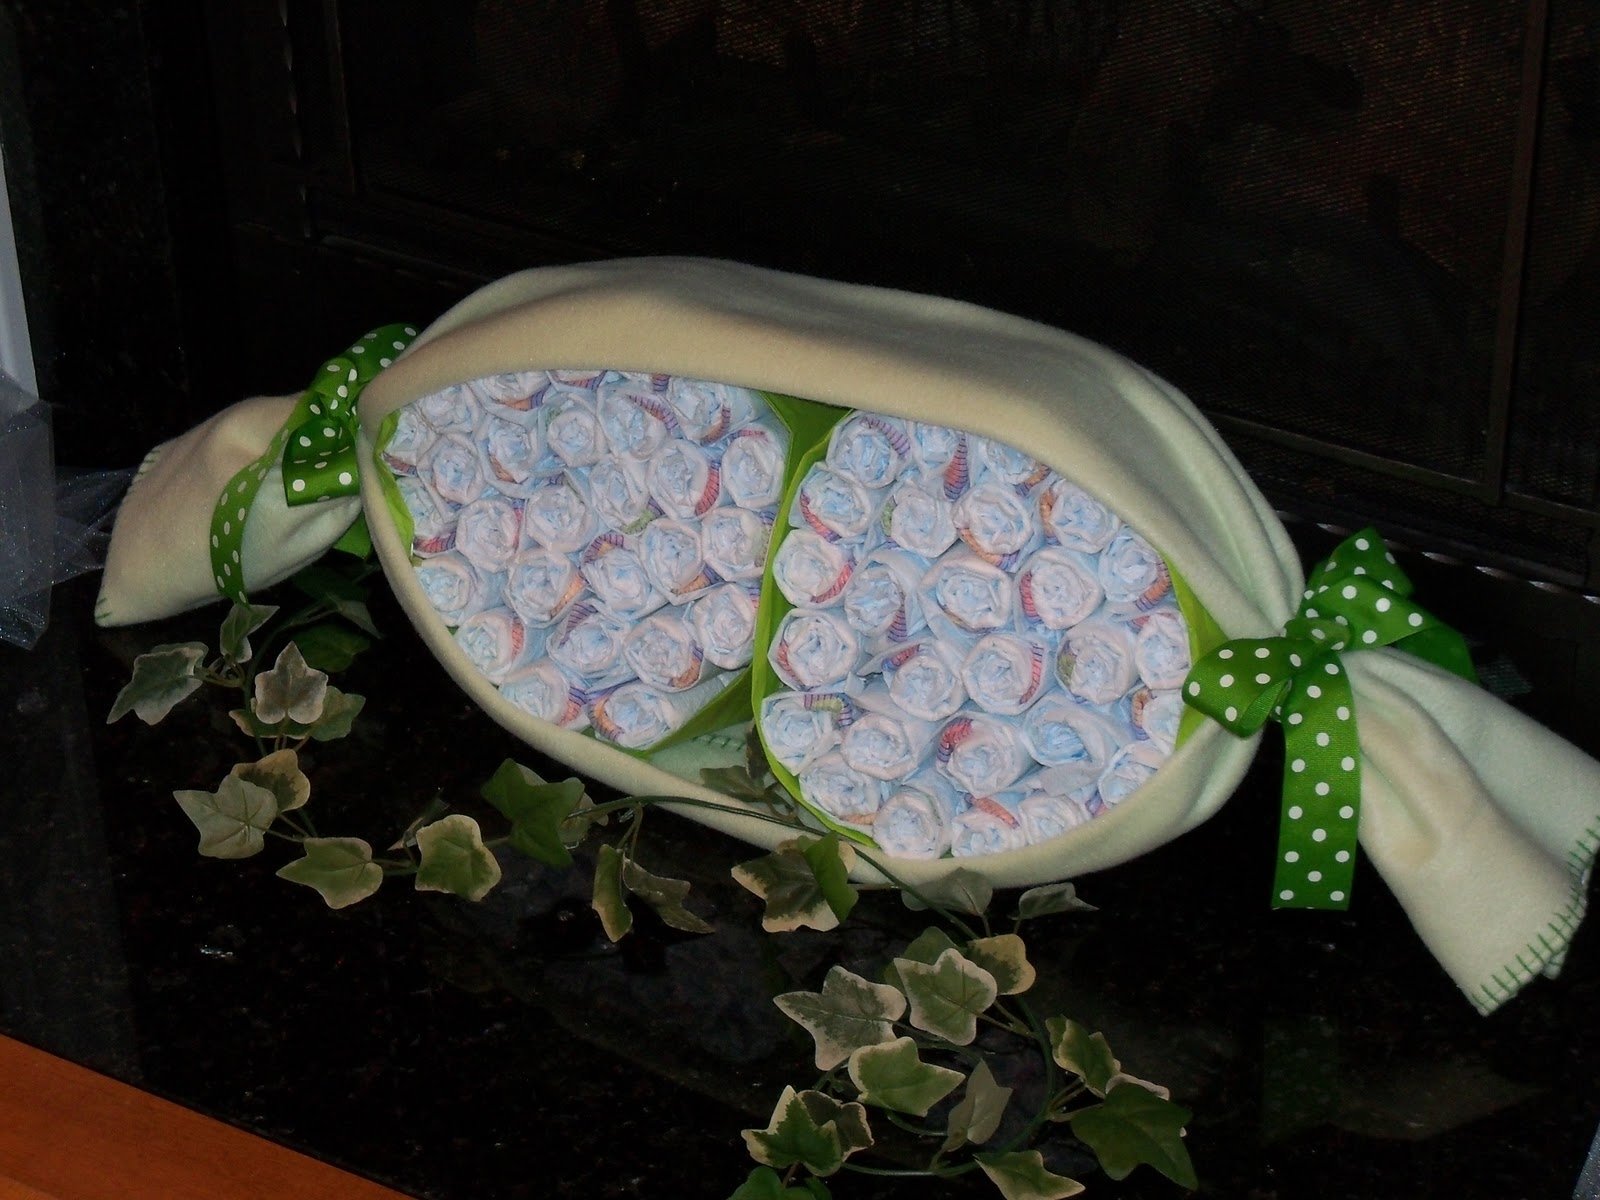 10 Most Recommended Two Peas In A Pod Baby Shower Ideas two peas in a pod diaper centerpiece awesome have to try for next 2022